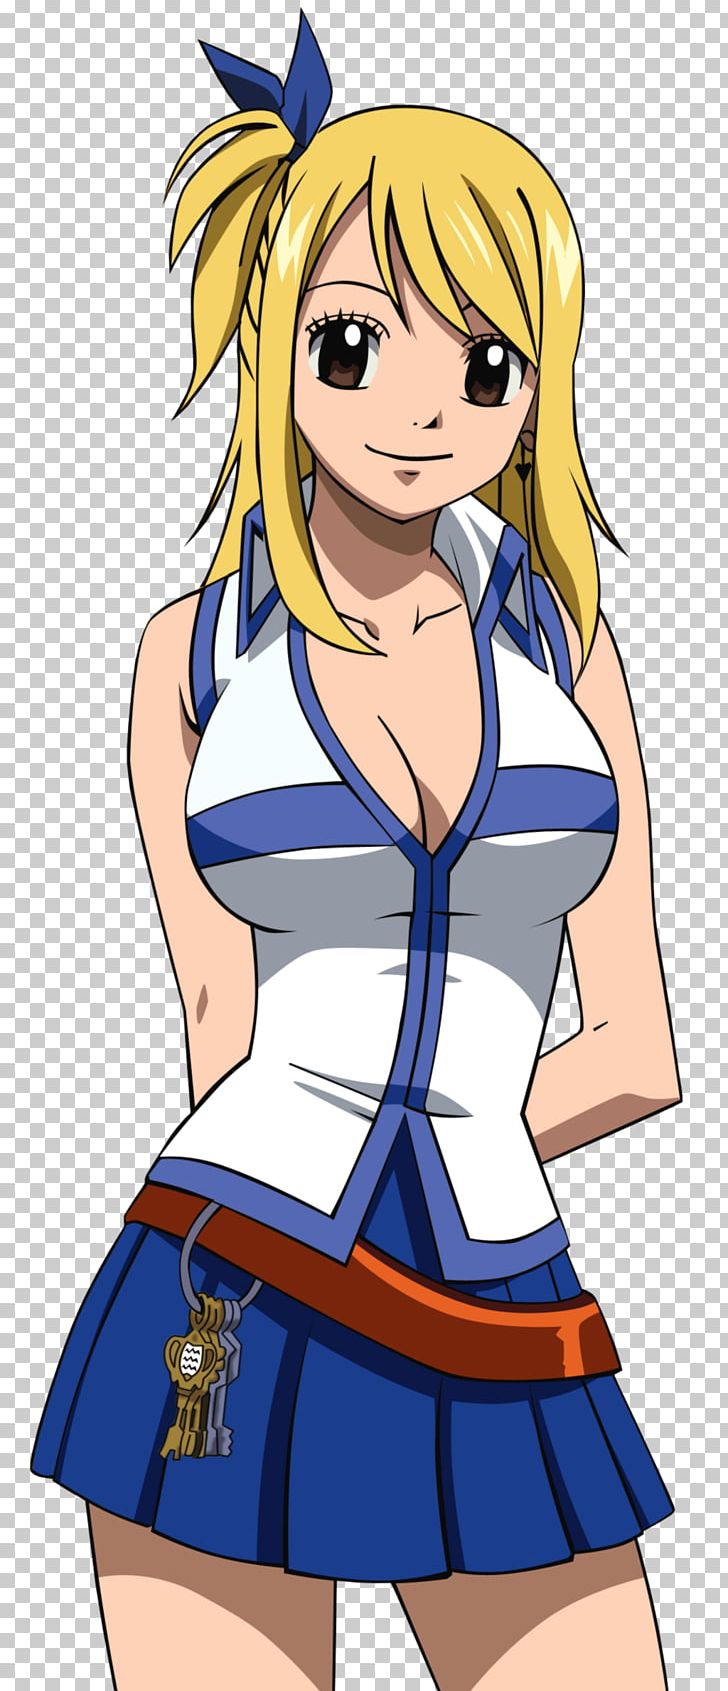 Lucy Heartfilia Erza Scarlet Natsu Dragneel Gray Fullbuster Fairy Tail: Portable Guild PNG, Clipart, Arm, Black Hair, Brown Hair, Cartoon, Character Free PNG Download